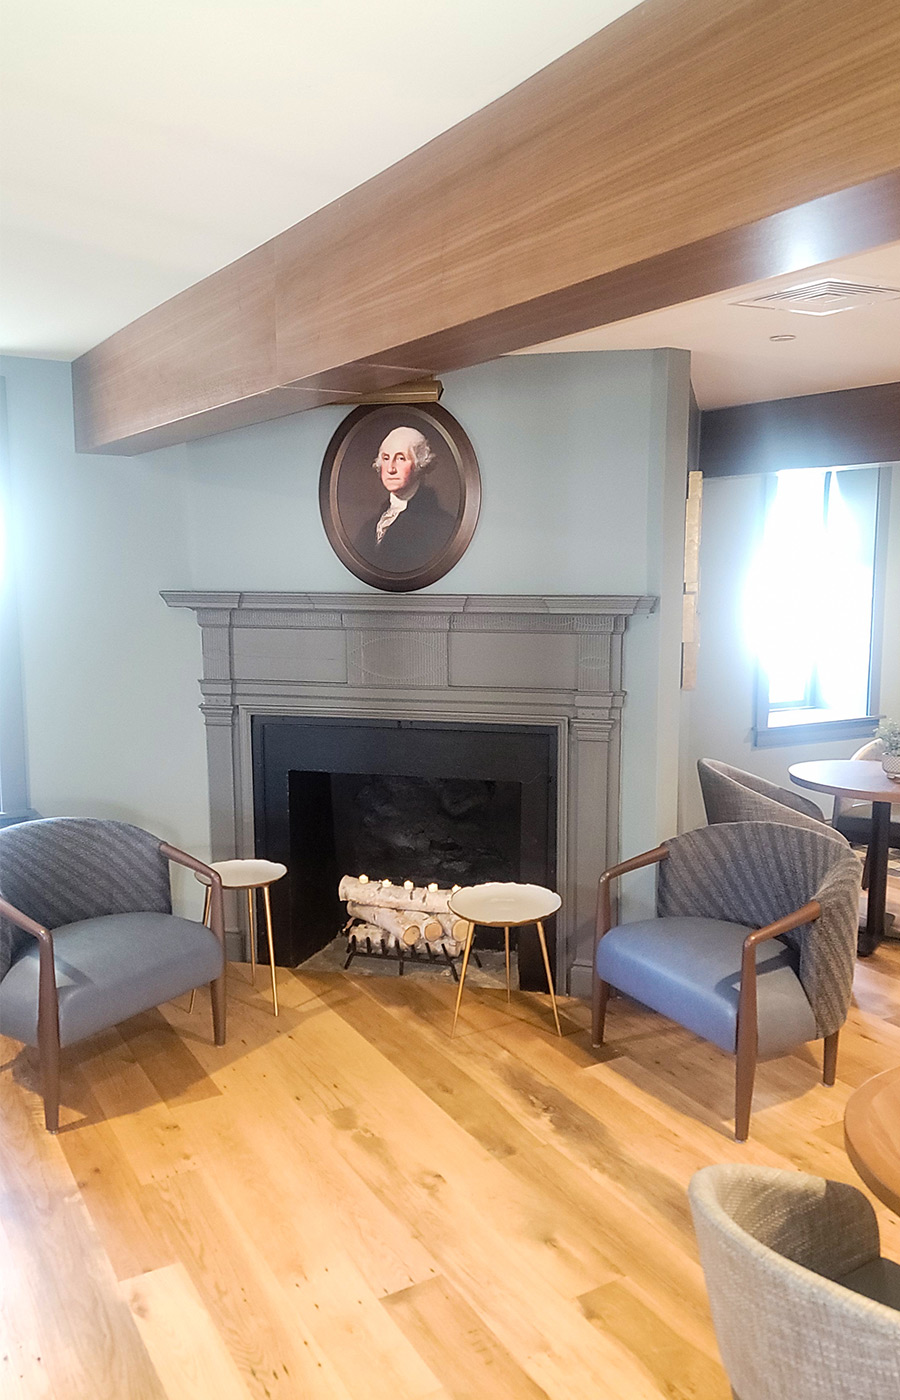 The inside of the Washington House Tavern with a portrait on the wall and fireplace.